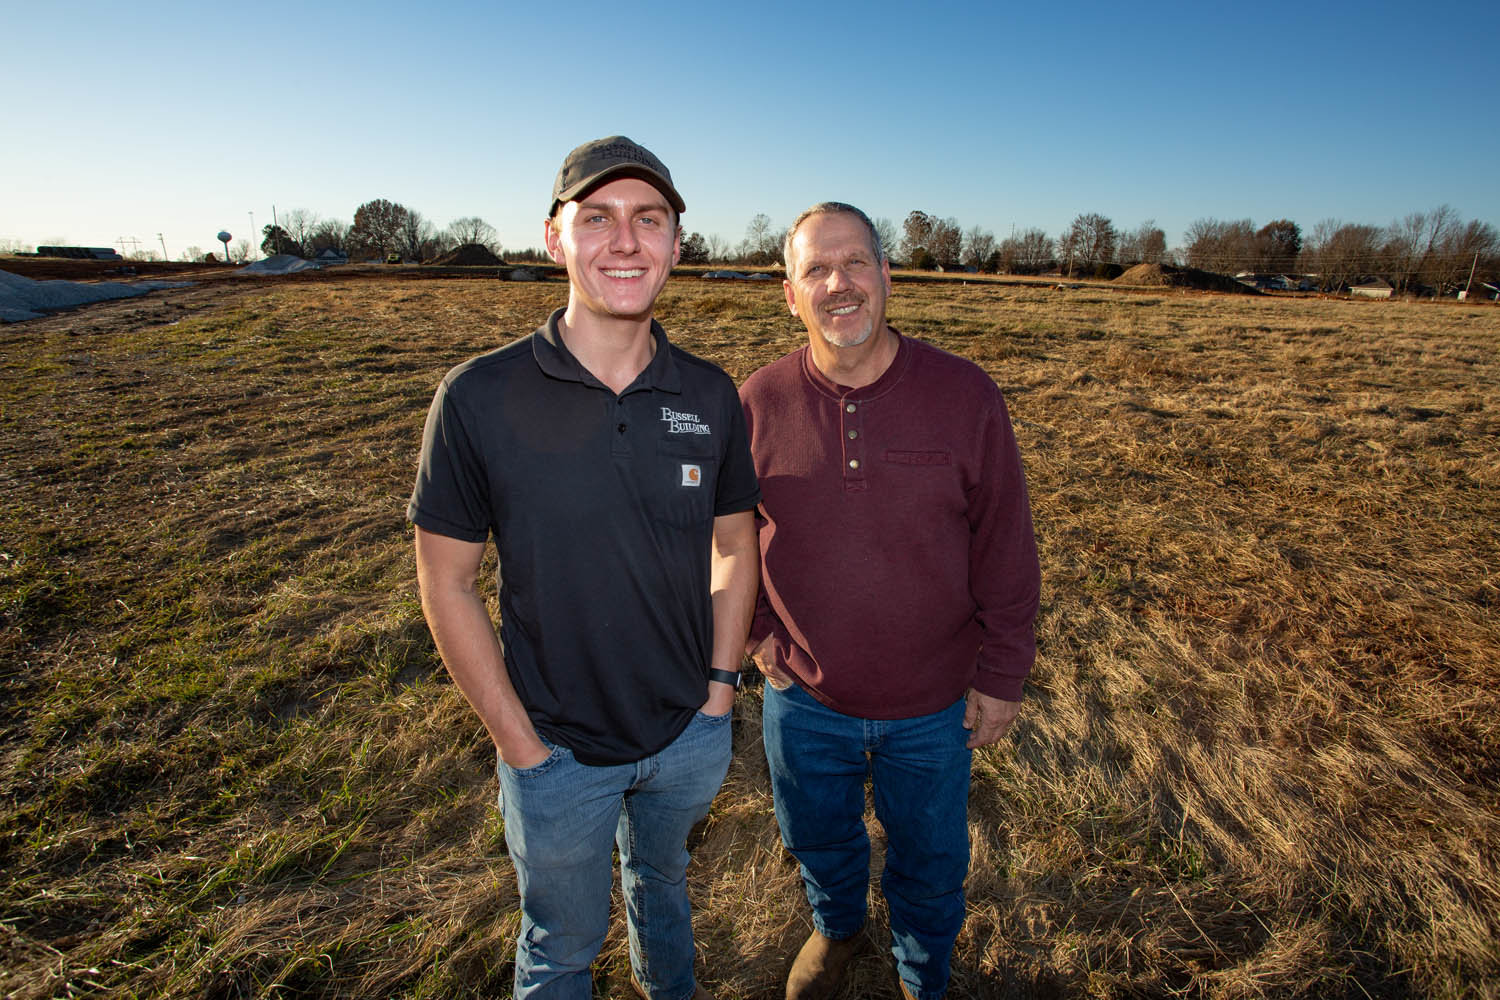 MEETING THE DEMAND: Bussell Building, led by Tyler, left, and Kenny Bussell, is developing six subdivisions, including a new one on 200 acres in Battlefield.